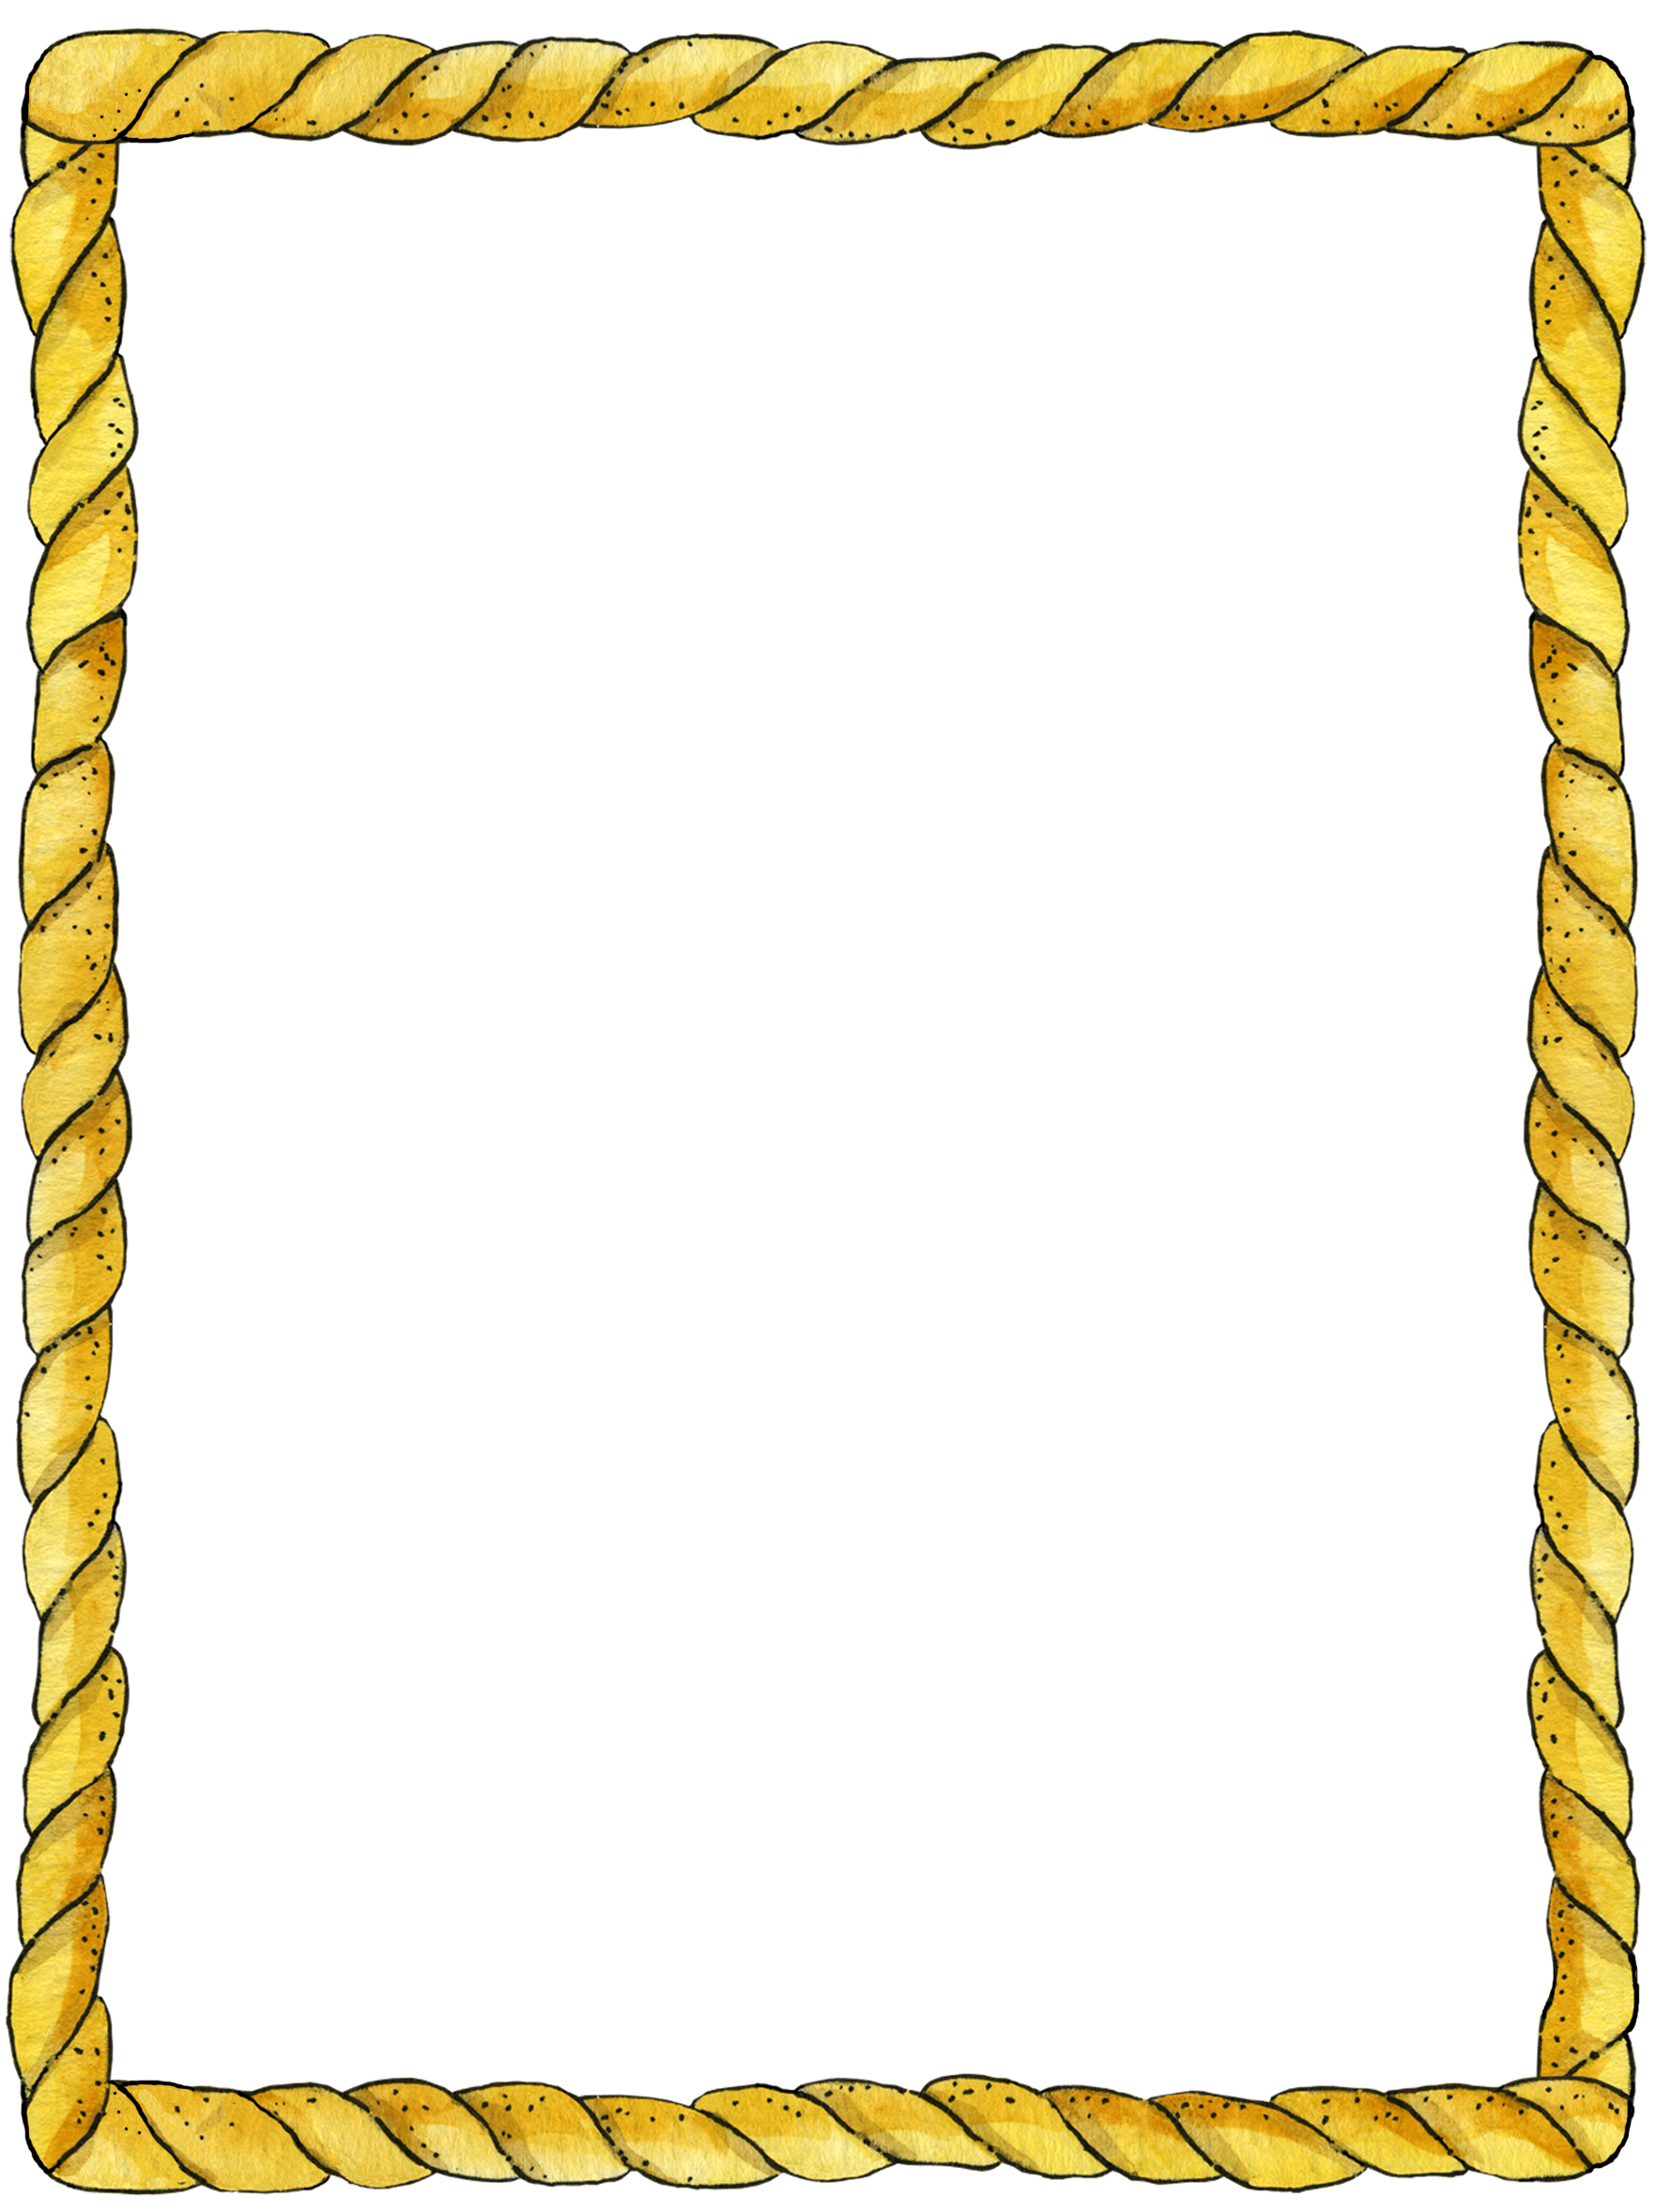 Rope border and corner. Clipart computer frame